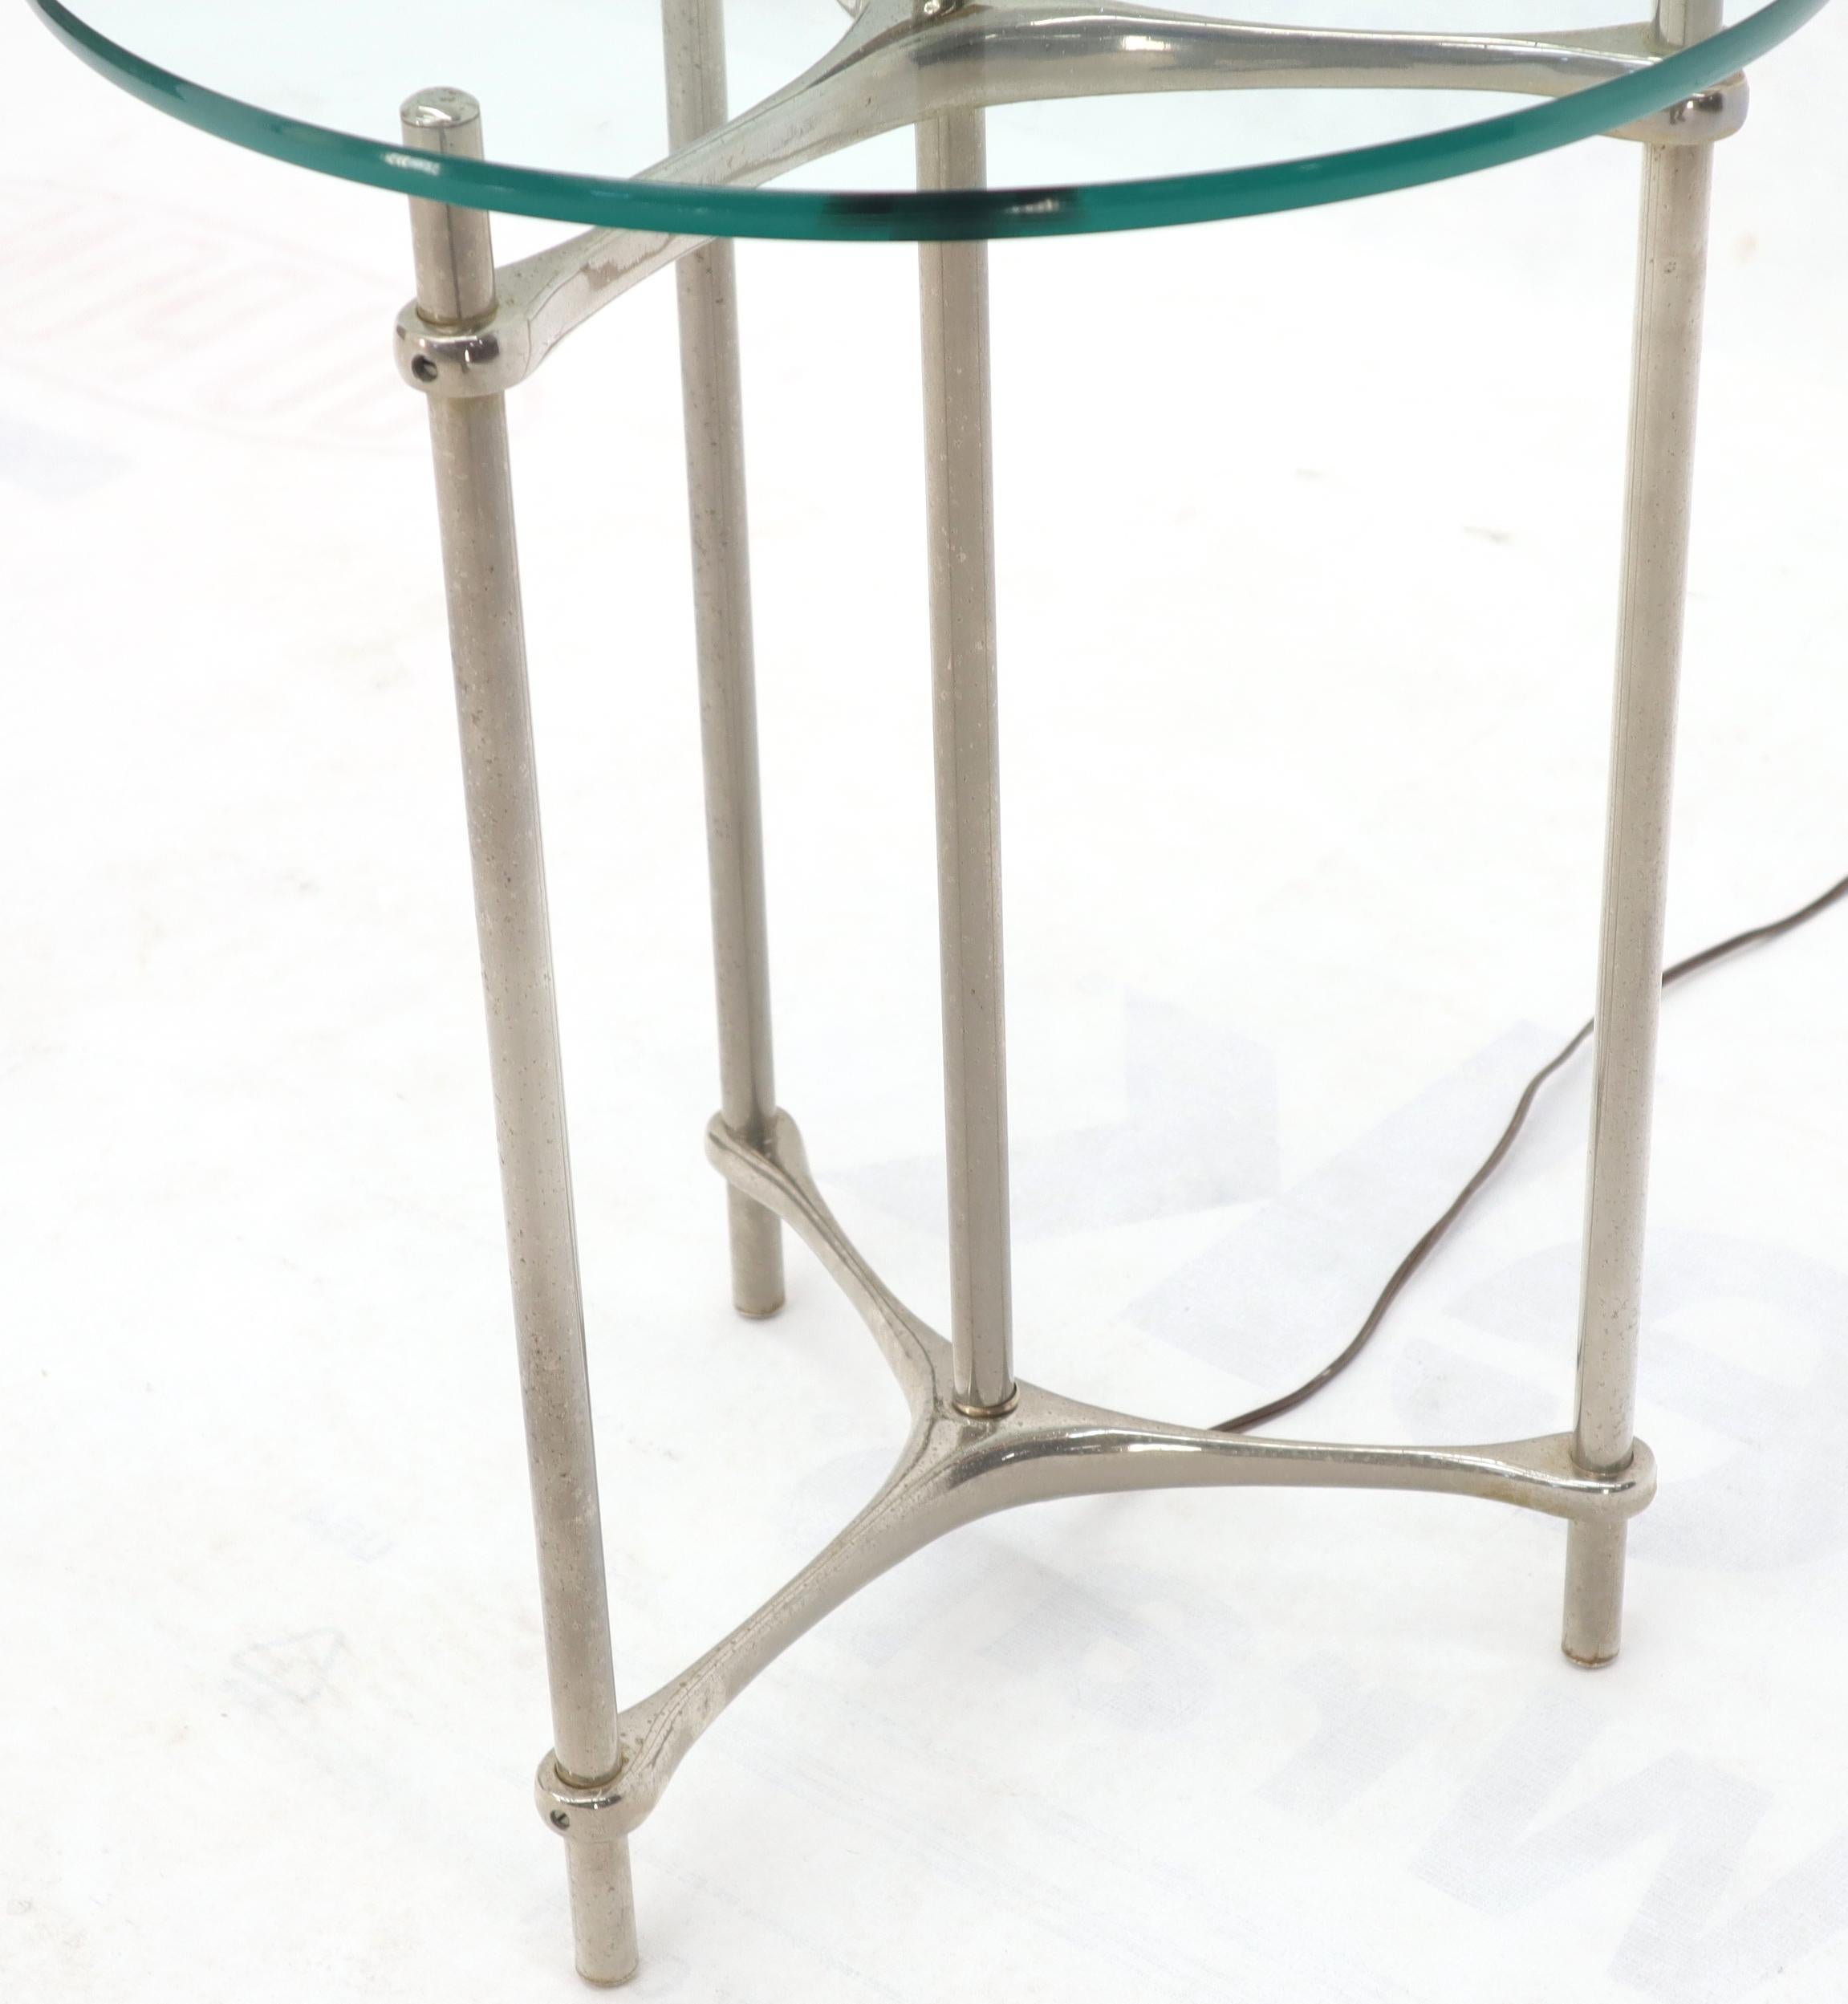 Chrome Tripod Base Glass Side Table Floor Lamp In Excellent Condition For Sale In Rockaway, NJ